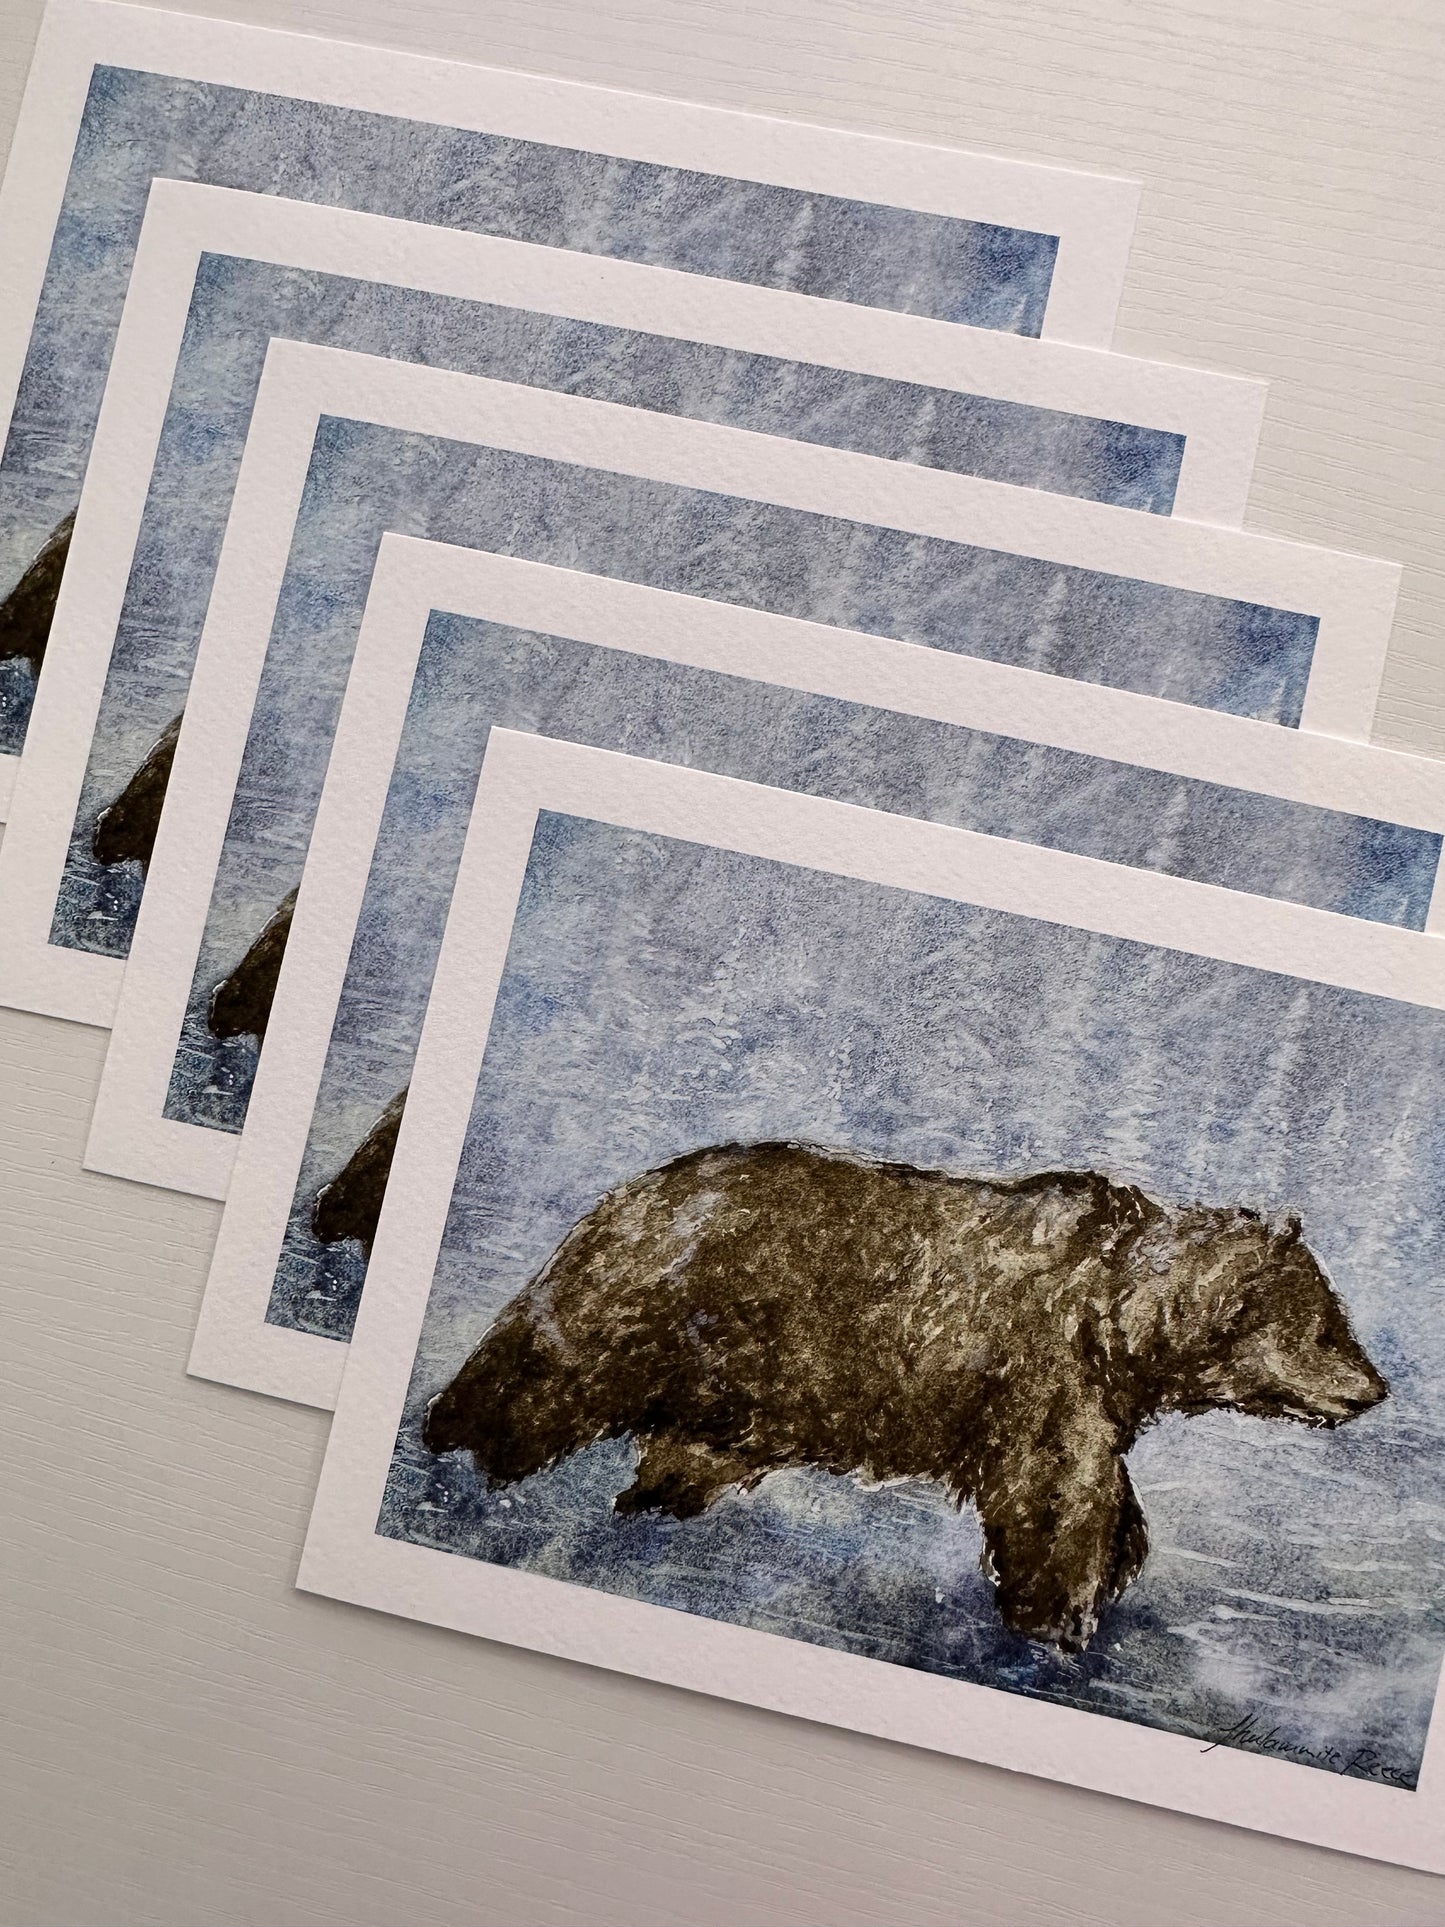 Giclee Print - Grizzly Bear in Wonder - IT'S CORDOVA